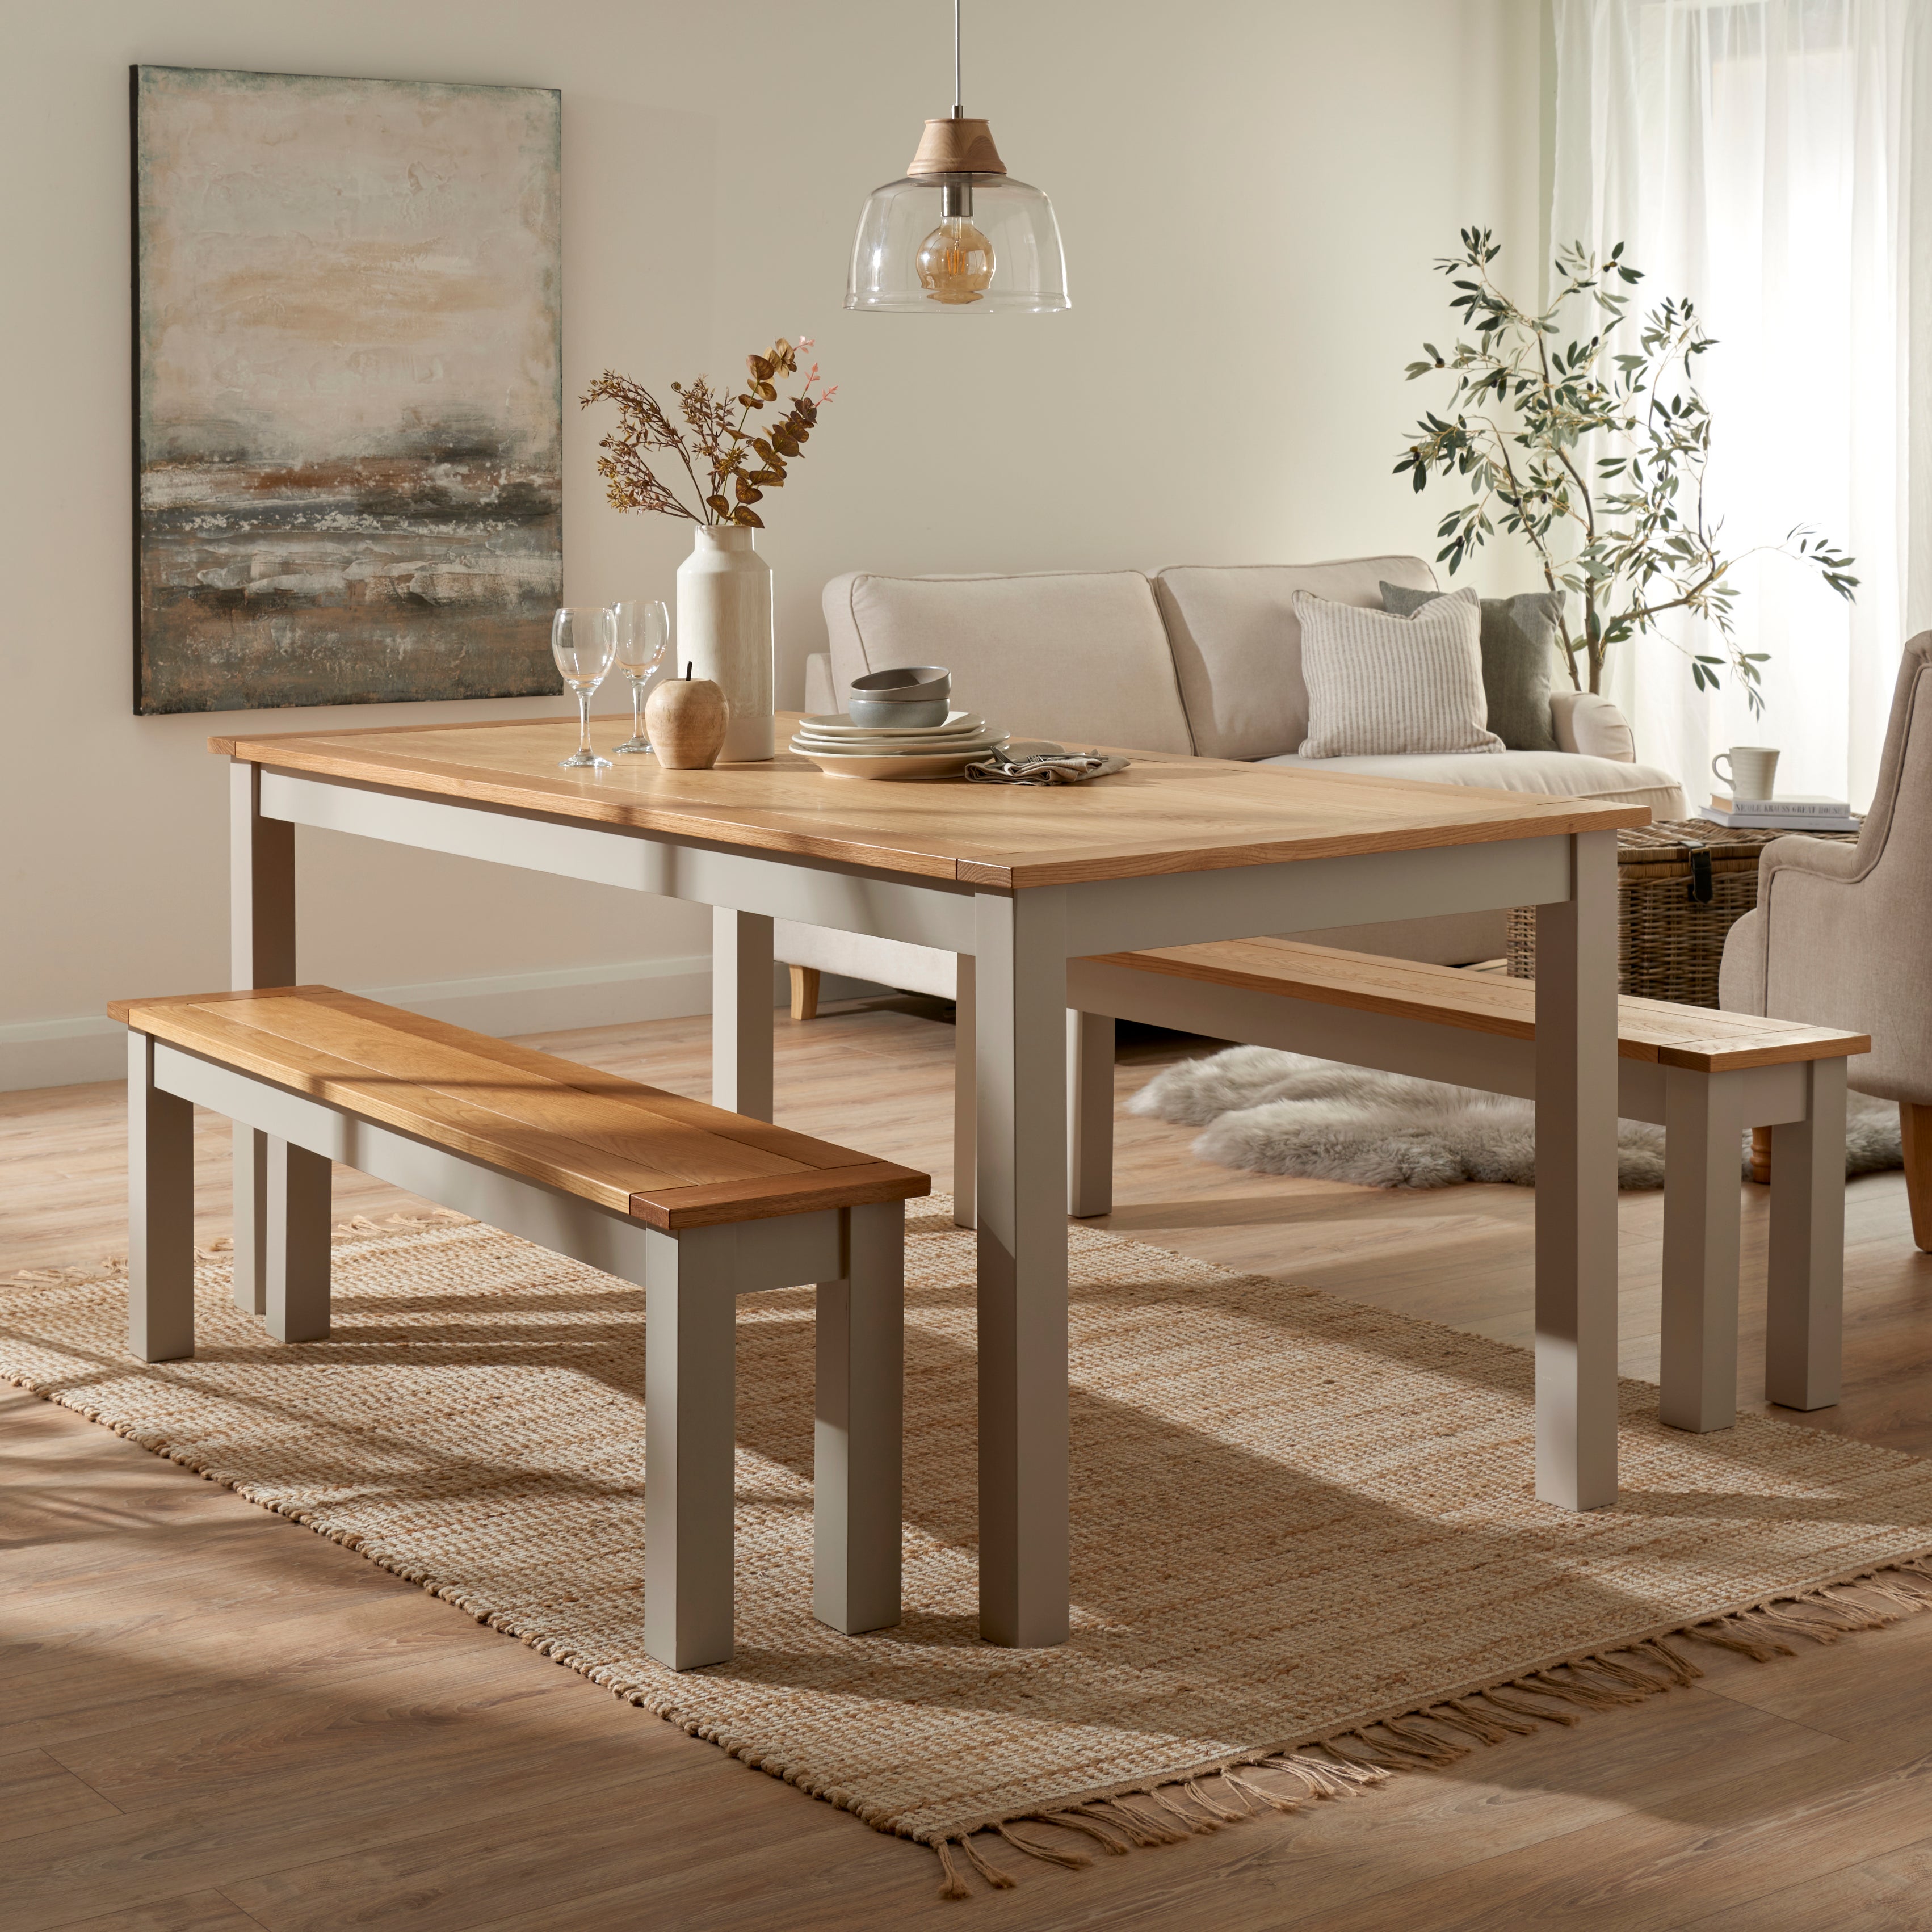 Clifford Rectangular Dining Table with 2 Benches